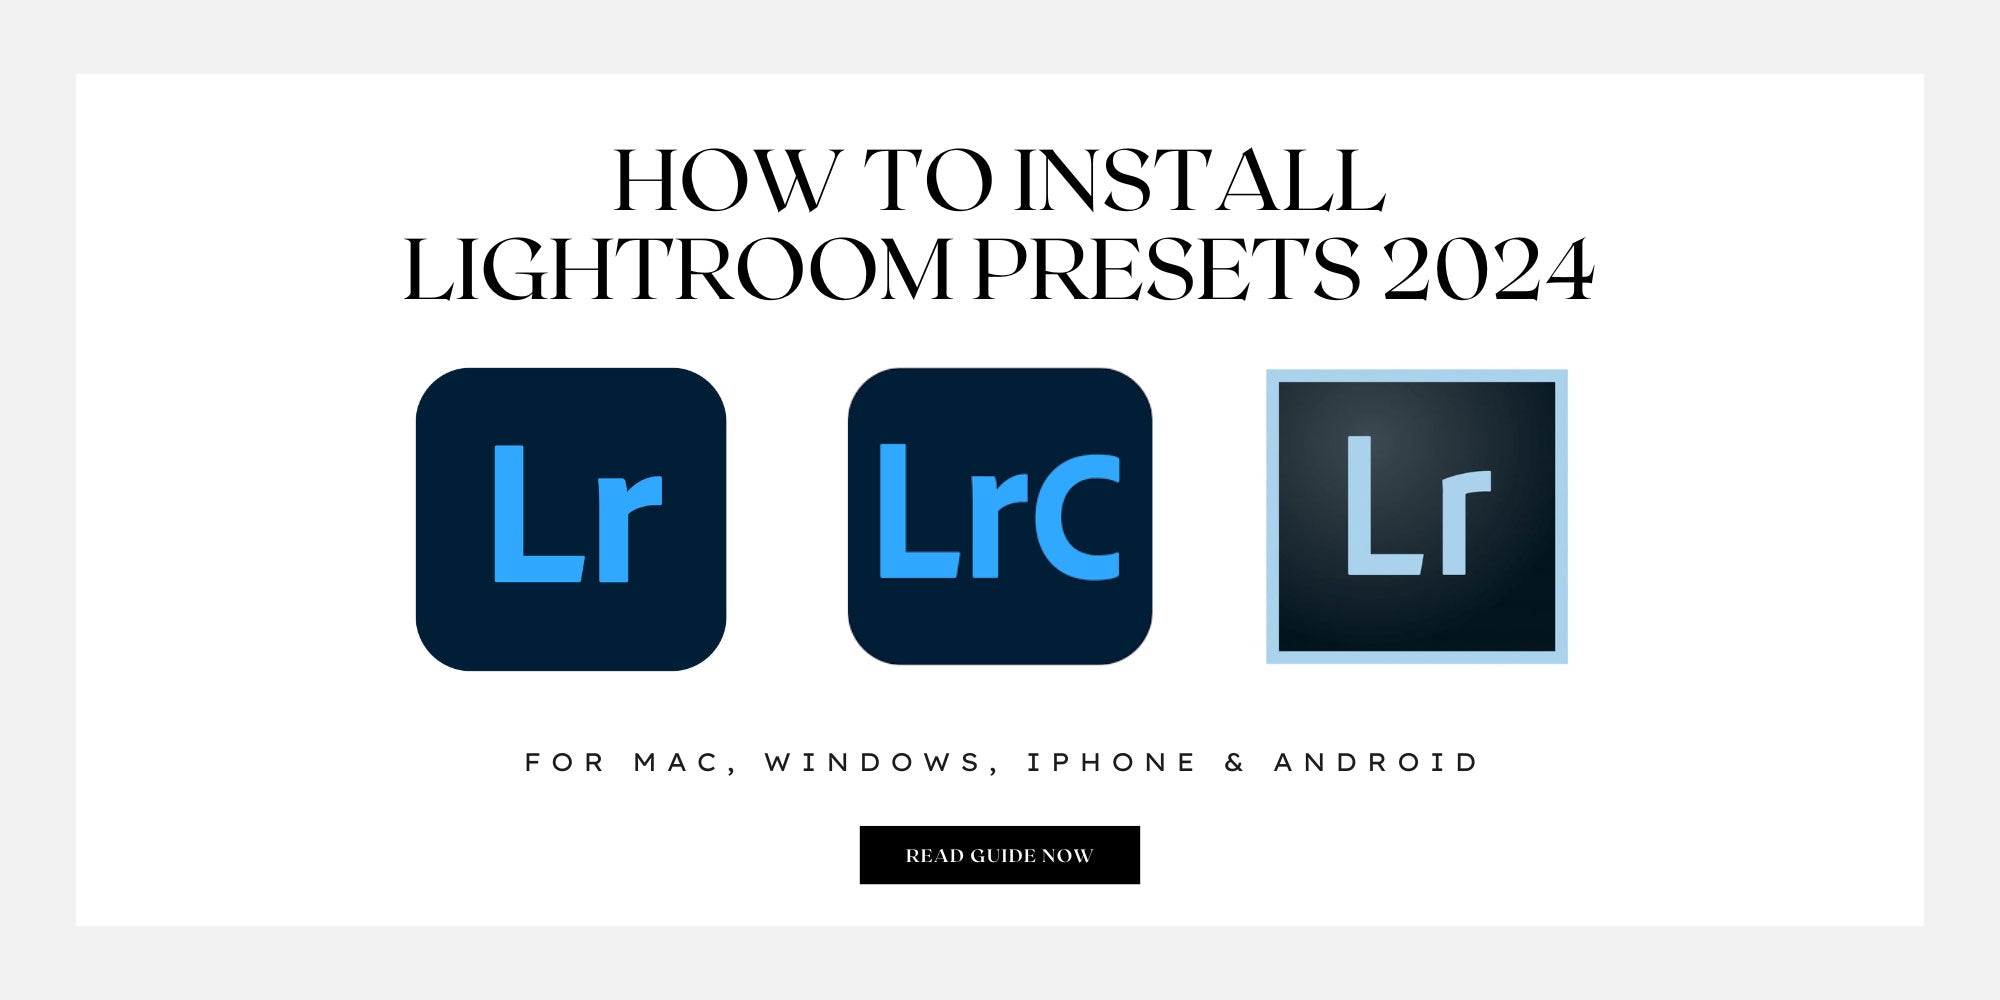 How To Install Lightroom Presets 2024